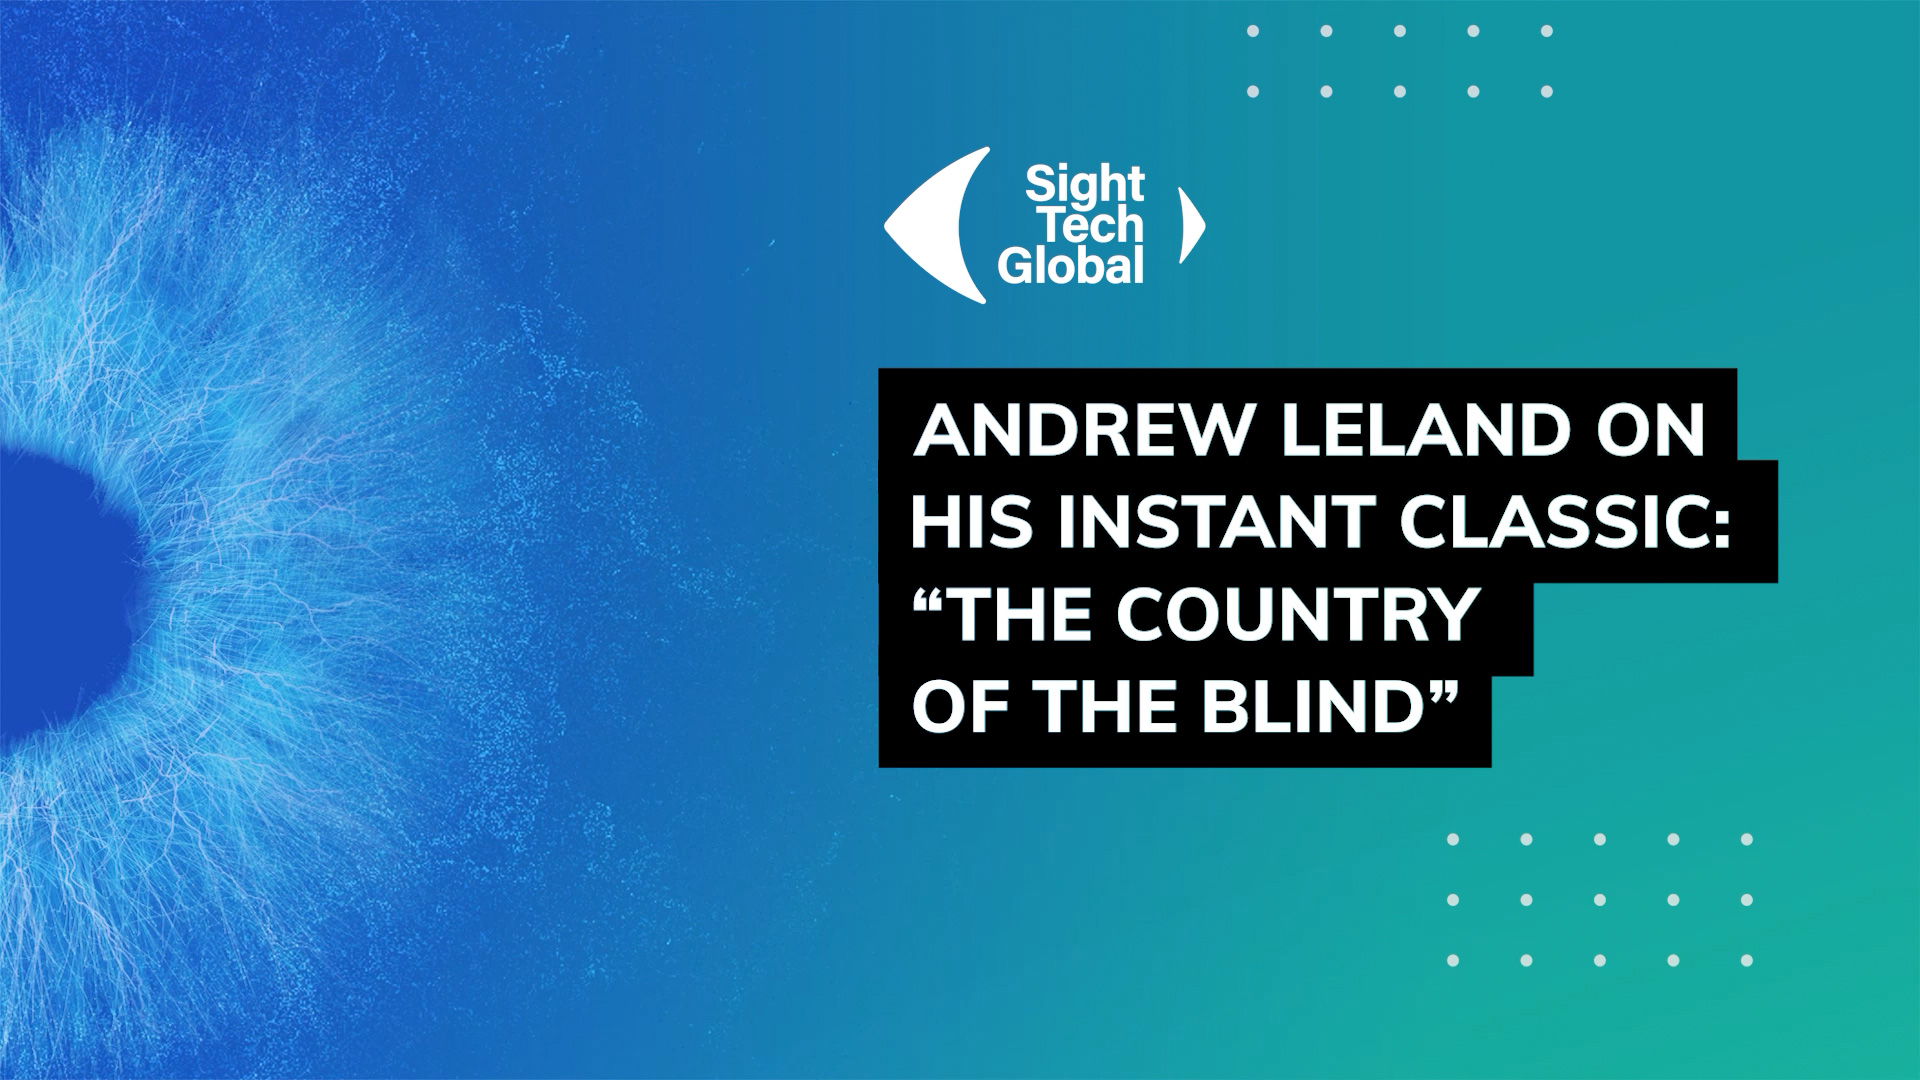 Andrew Leland on his instant classic: “The Country of the Blind”